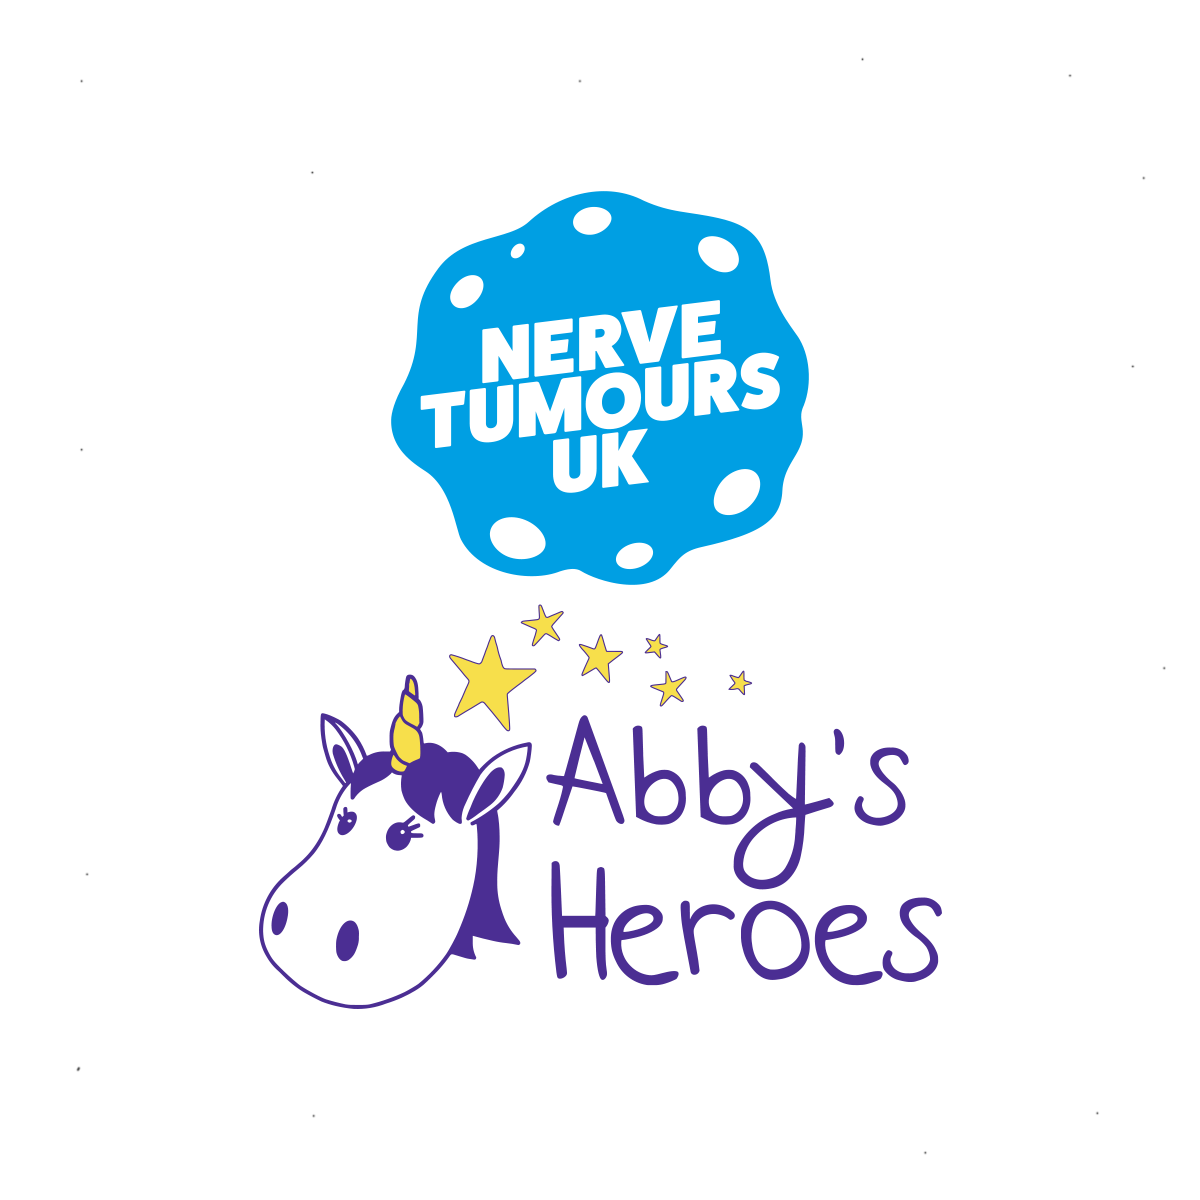 Nerve Tumours and Abby's Heroes company organisation logos.